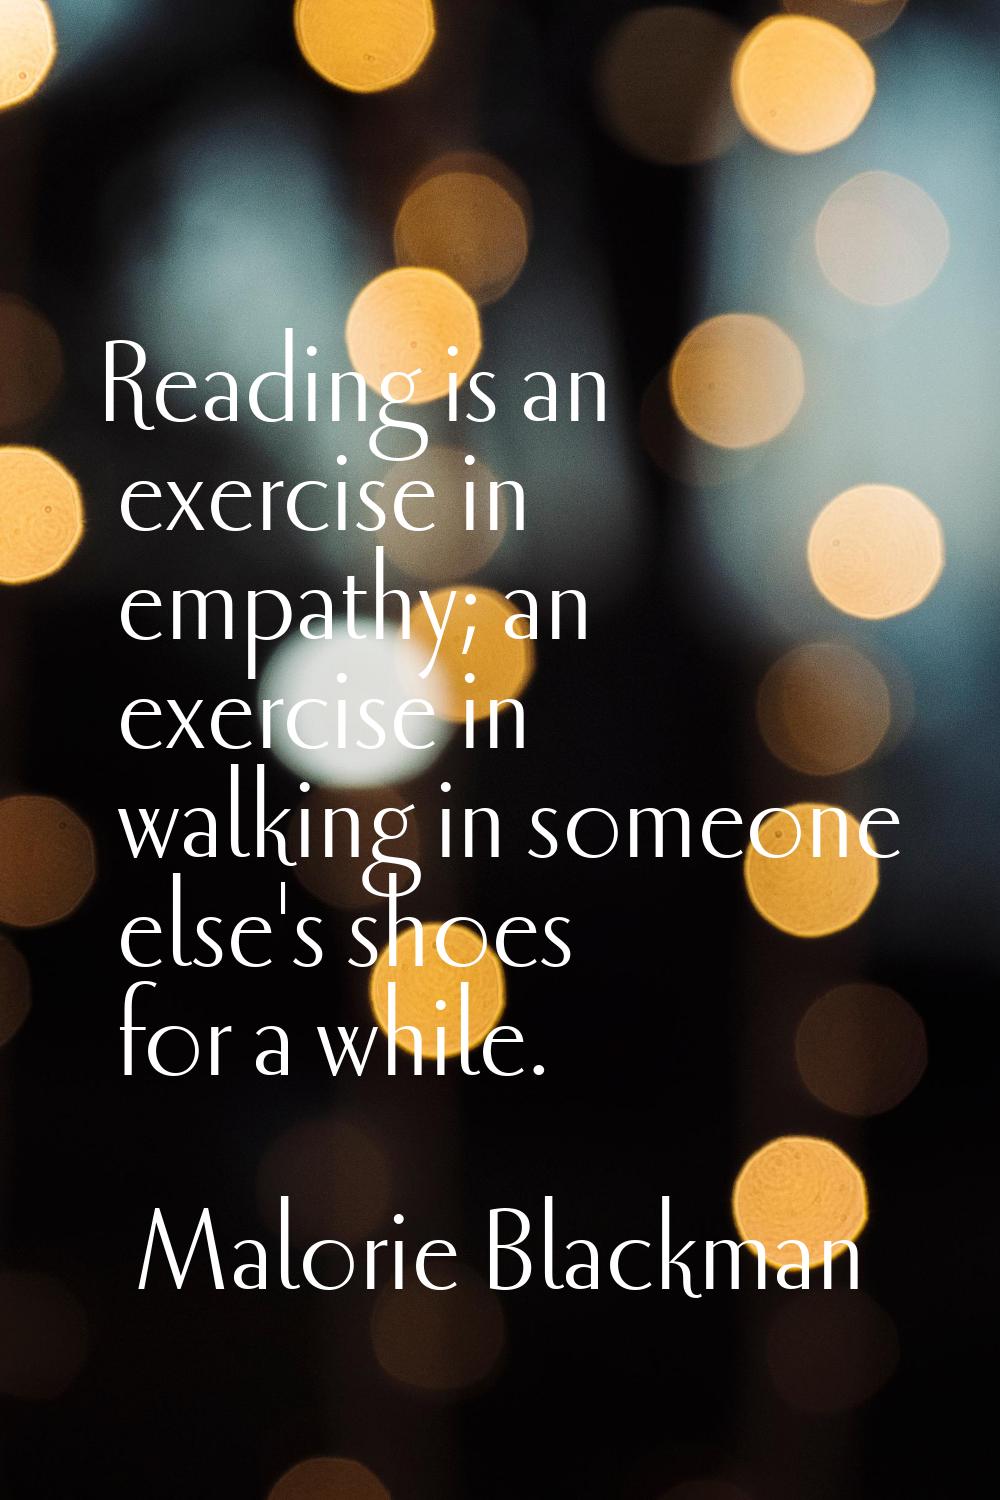 Reading is an exercise in empathy; an exercise in walking in someone else's shoes for a while.